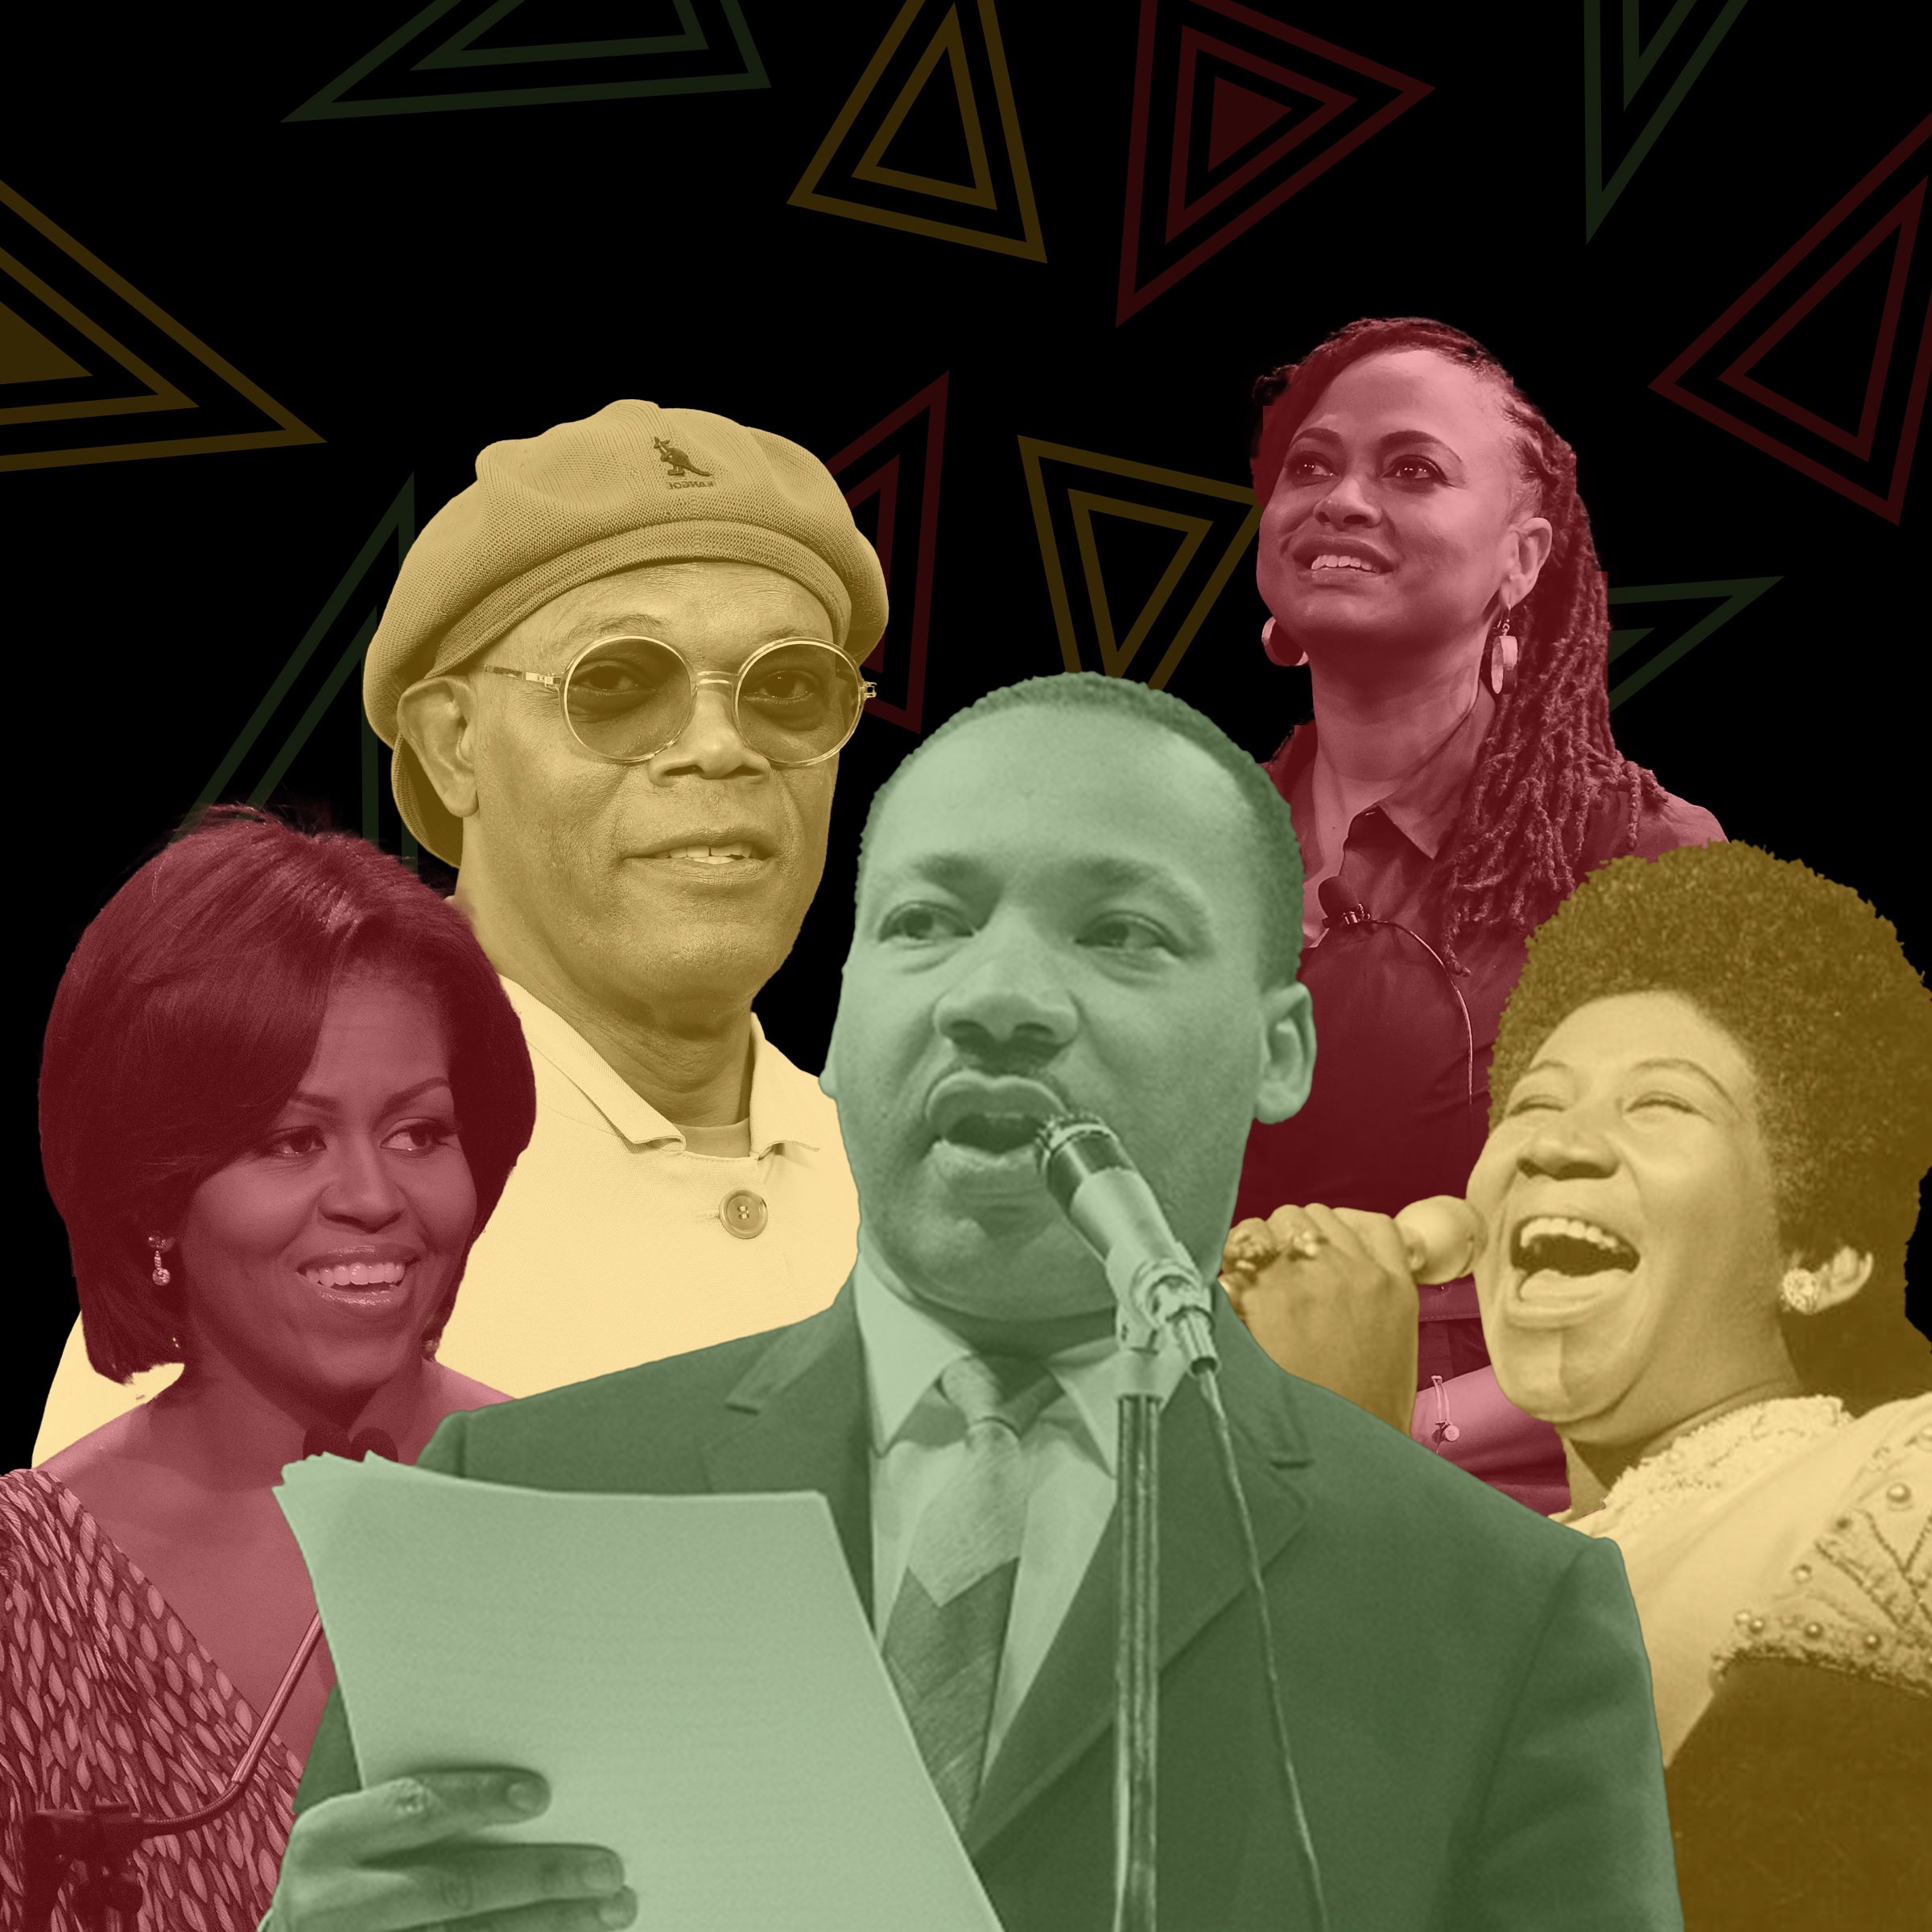 3 women pioneers who shaped Black History and American History